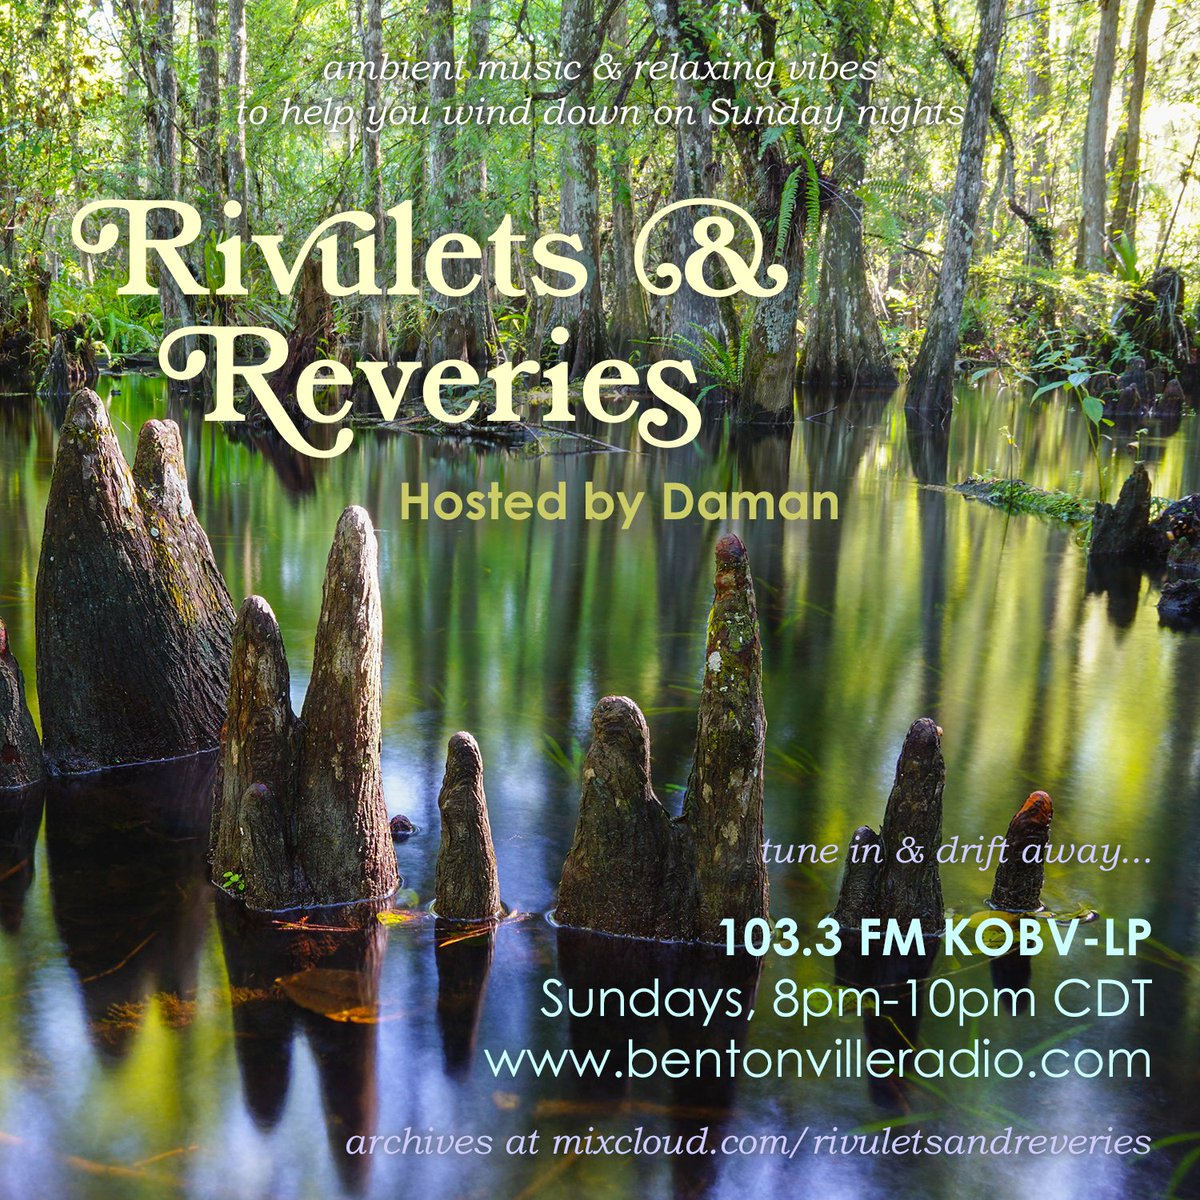 Tune your listening device to @kobv1033 this Sunday for the 52nd episode of Rivulets & Reveries. I can't believe I've done this every single week for an entire year. Time really flies....